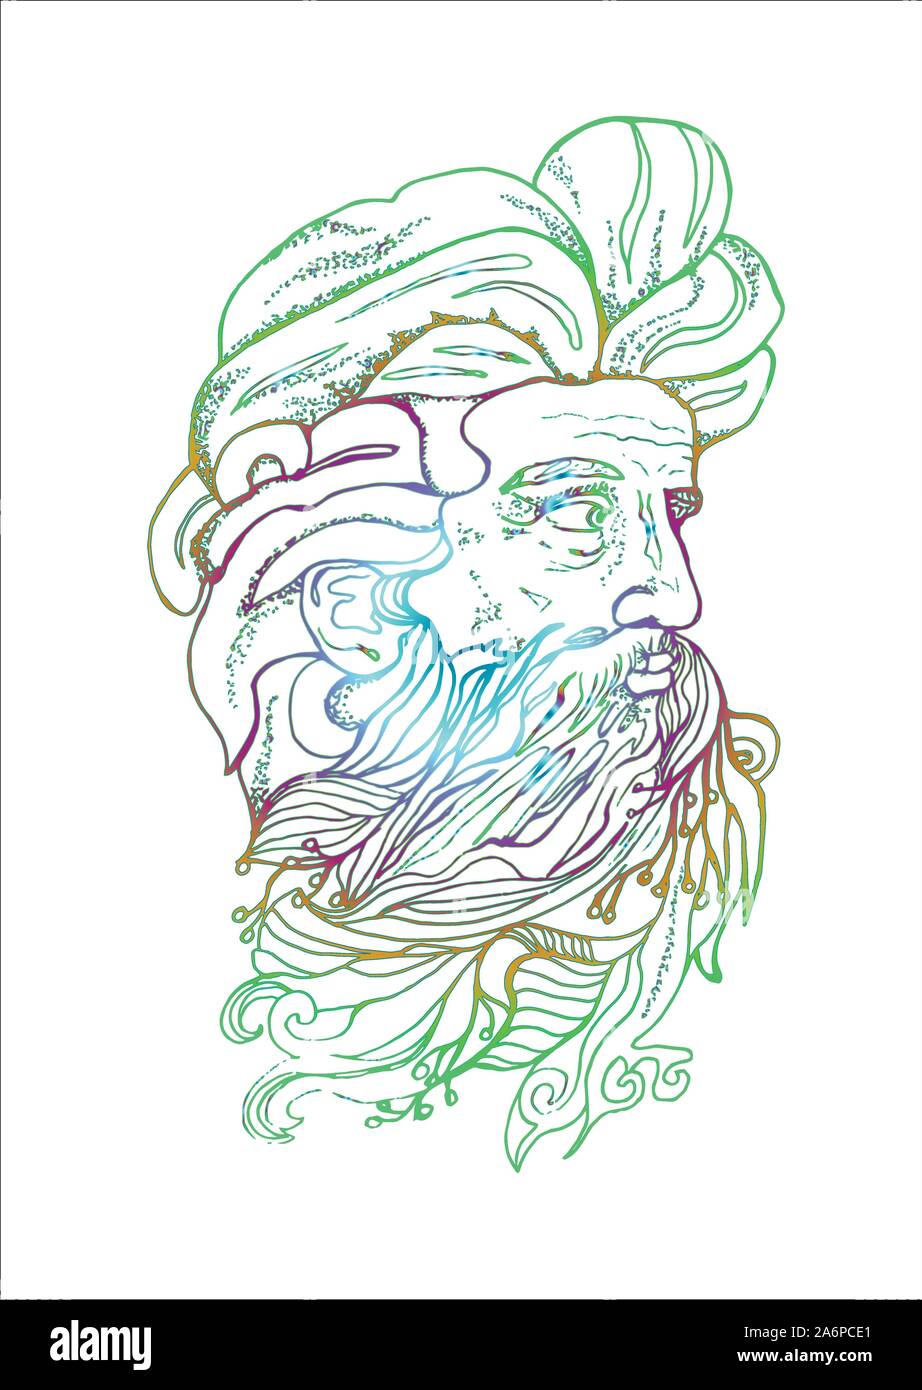 Neon illustration of a man's head with a beard and branches. Stock Vector